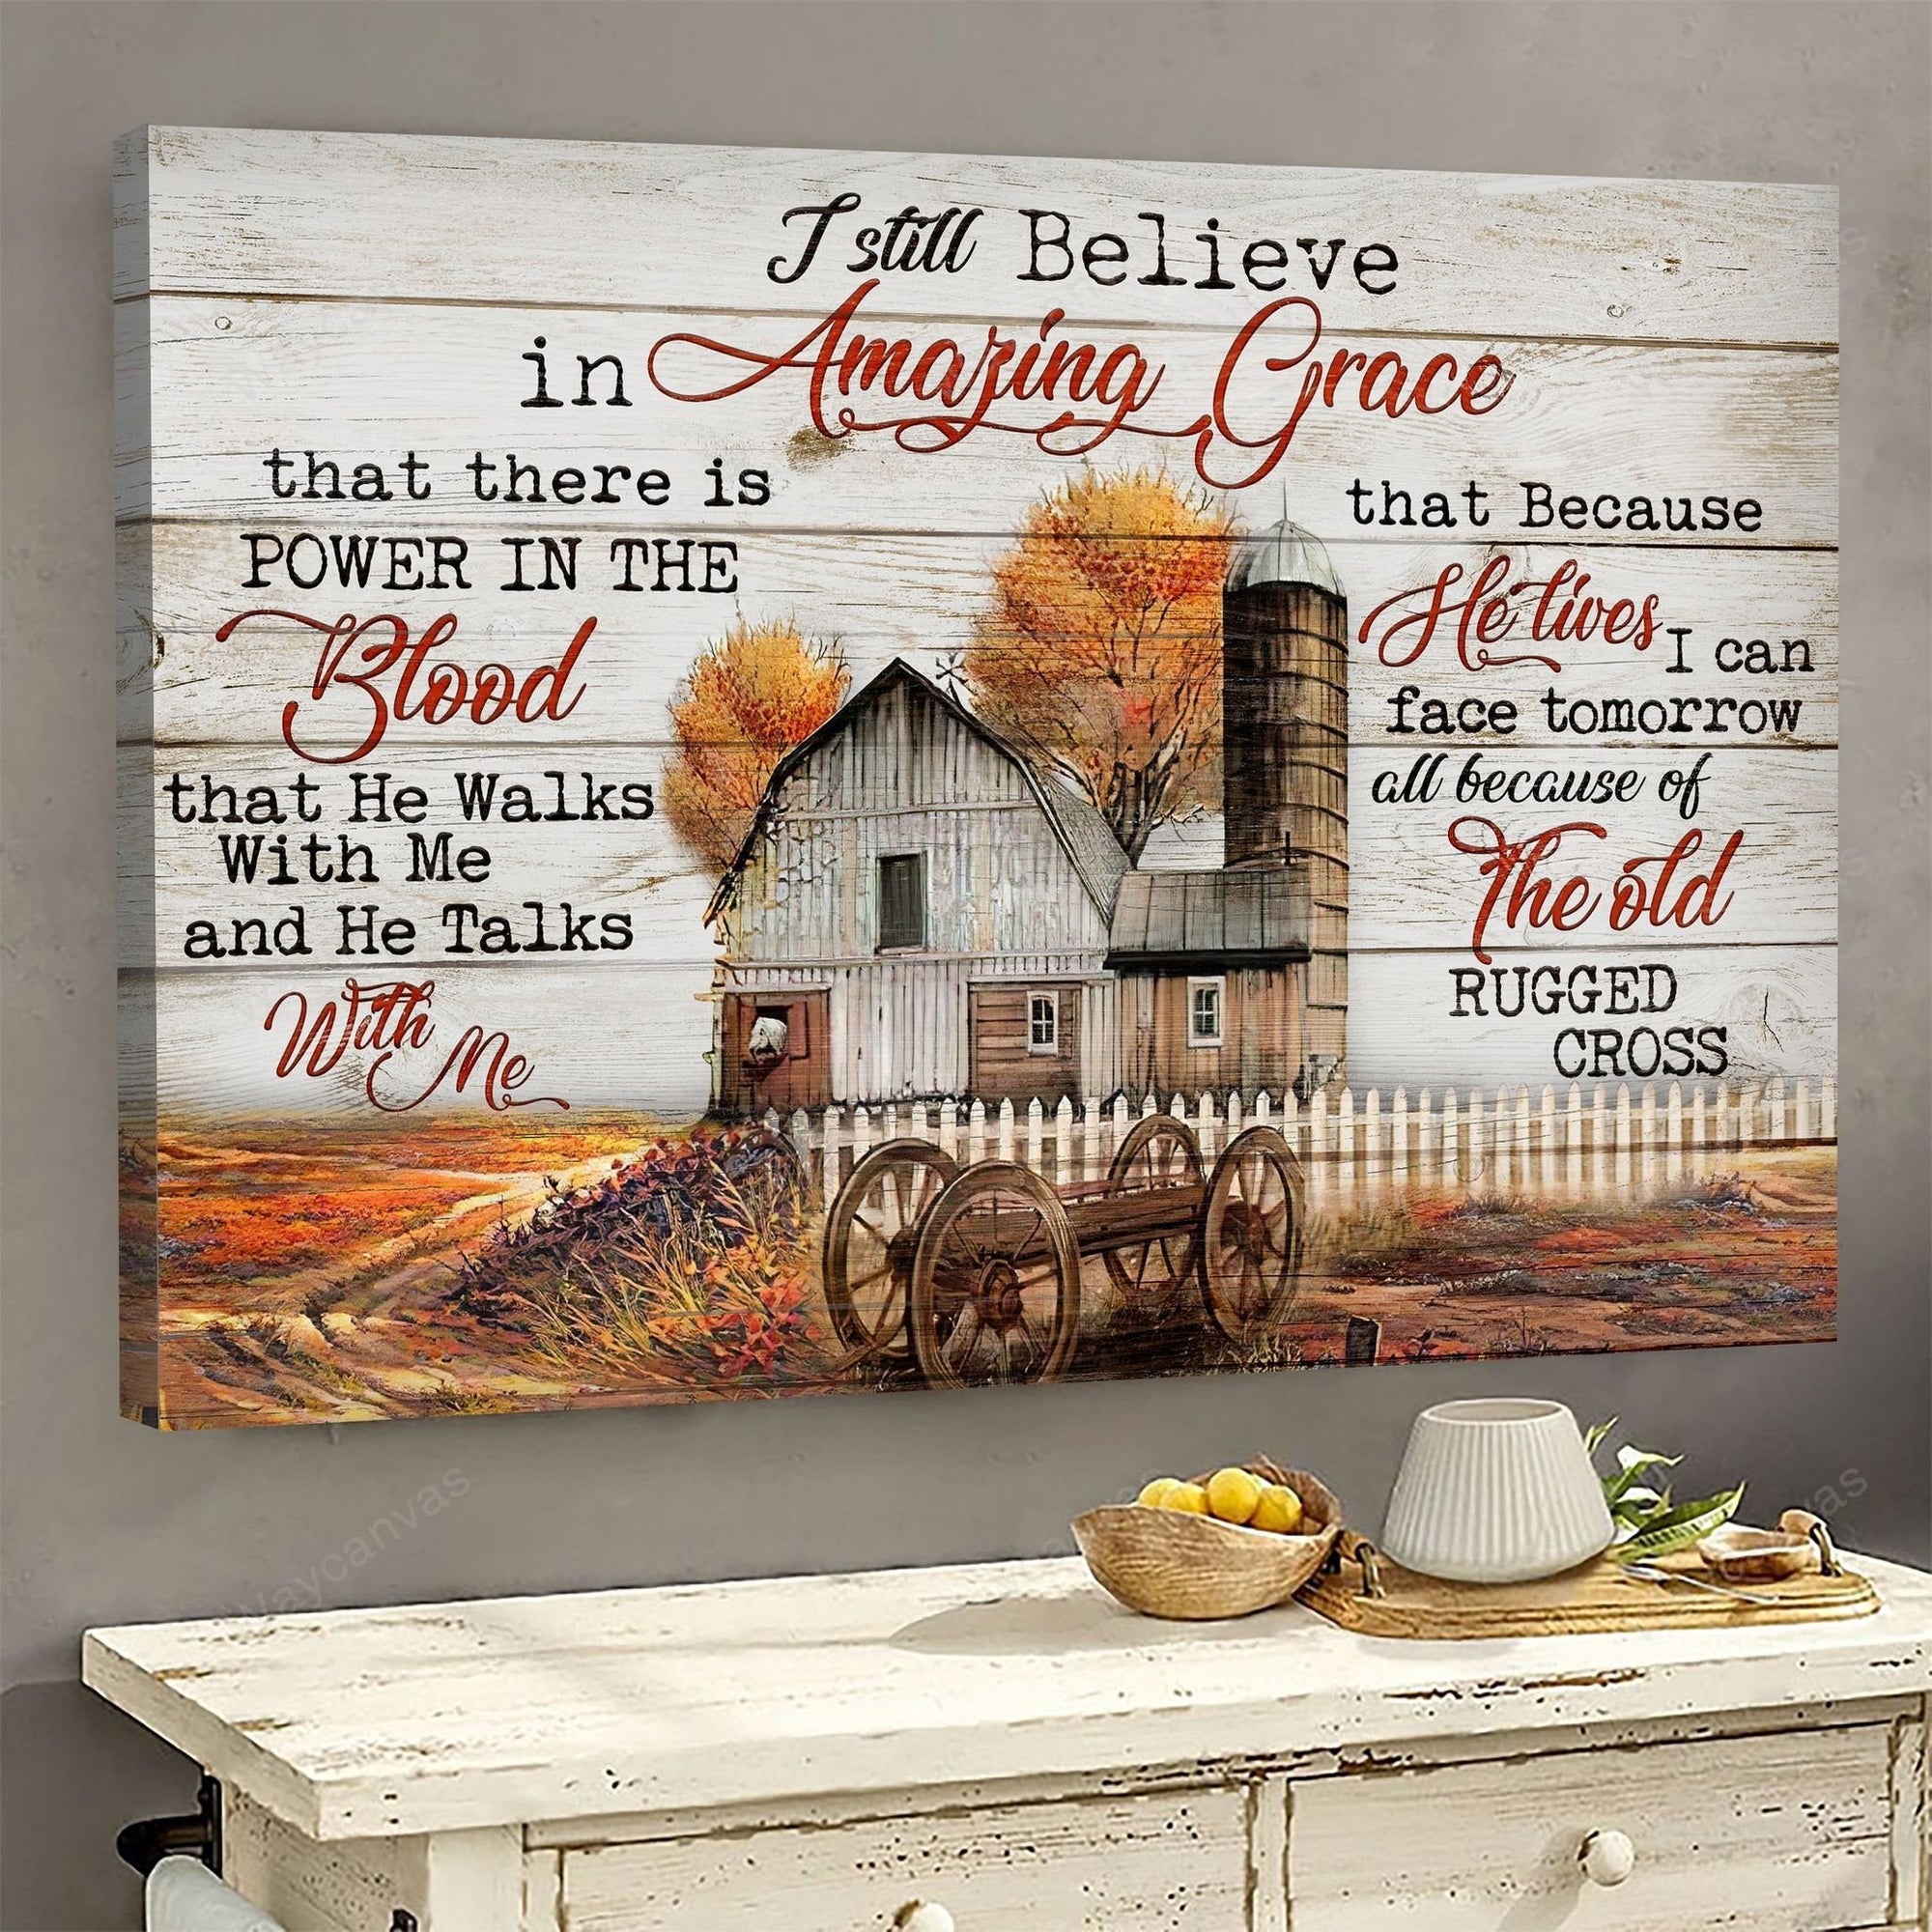 Countryside painting, Autumn field, Old barn house, I still believe in amazing grace - Jesus Landscape Canvas Print, Wall Art